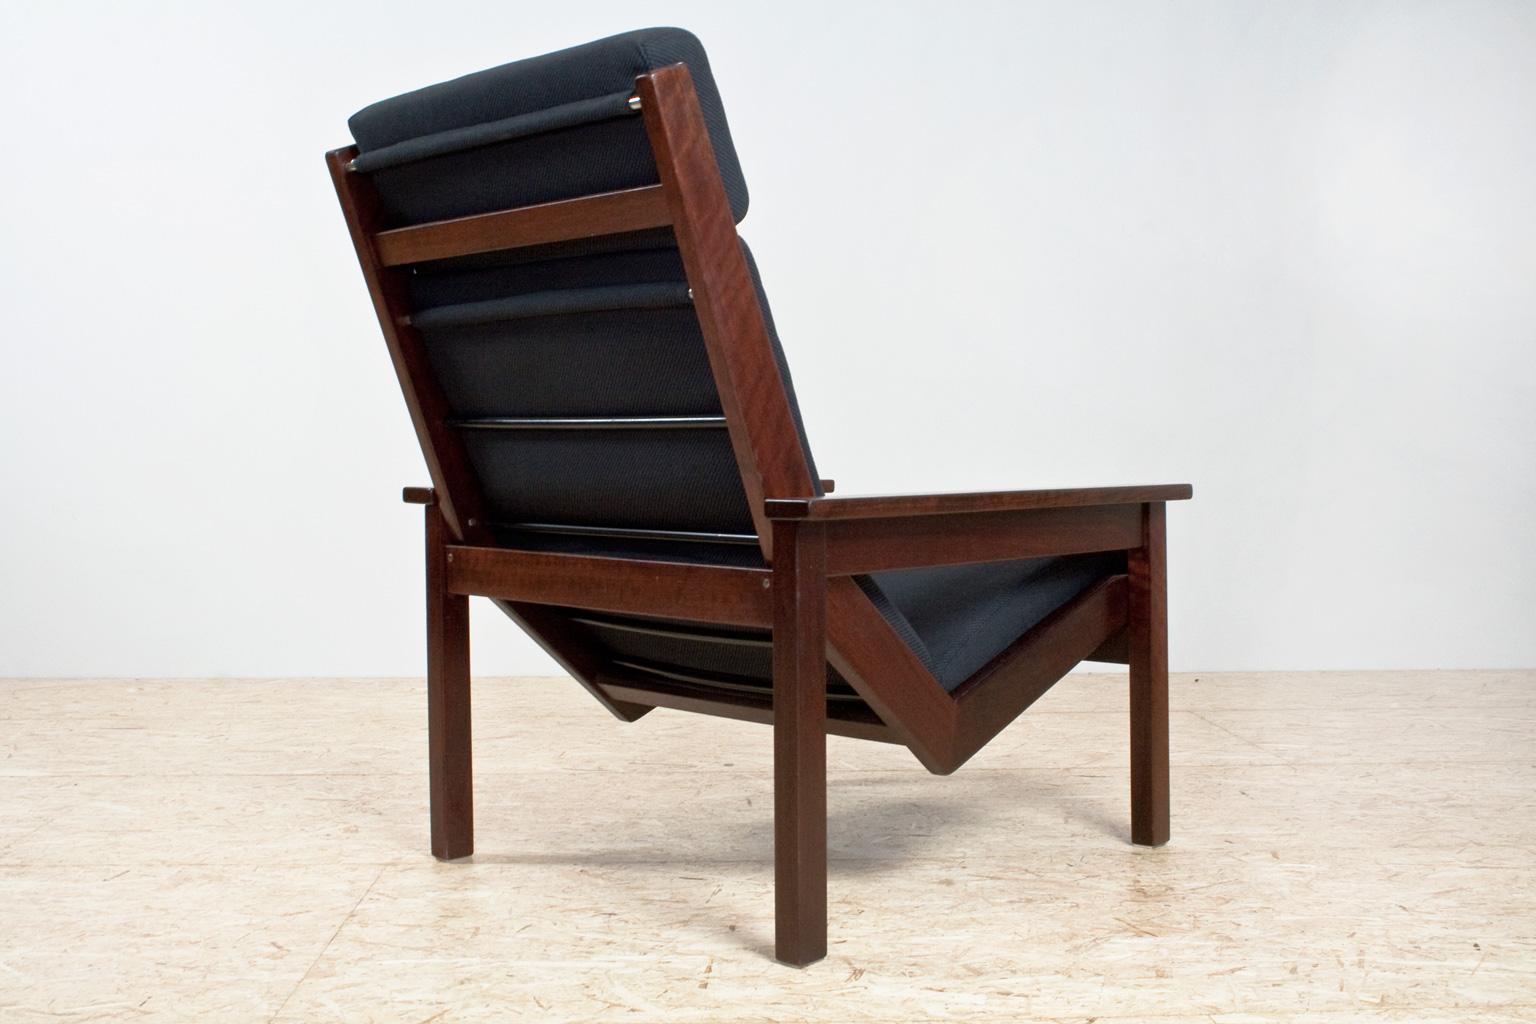 Dutch Mid-Century Modern Lotus Lounge Chair in teak and black by Rob Parry, 1960s